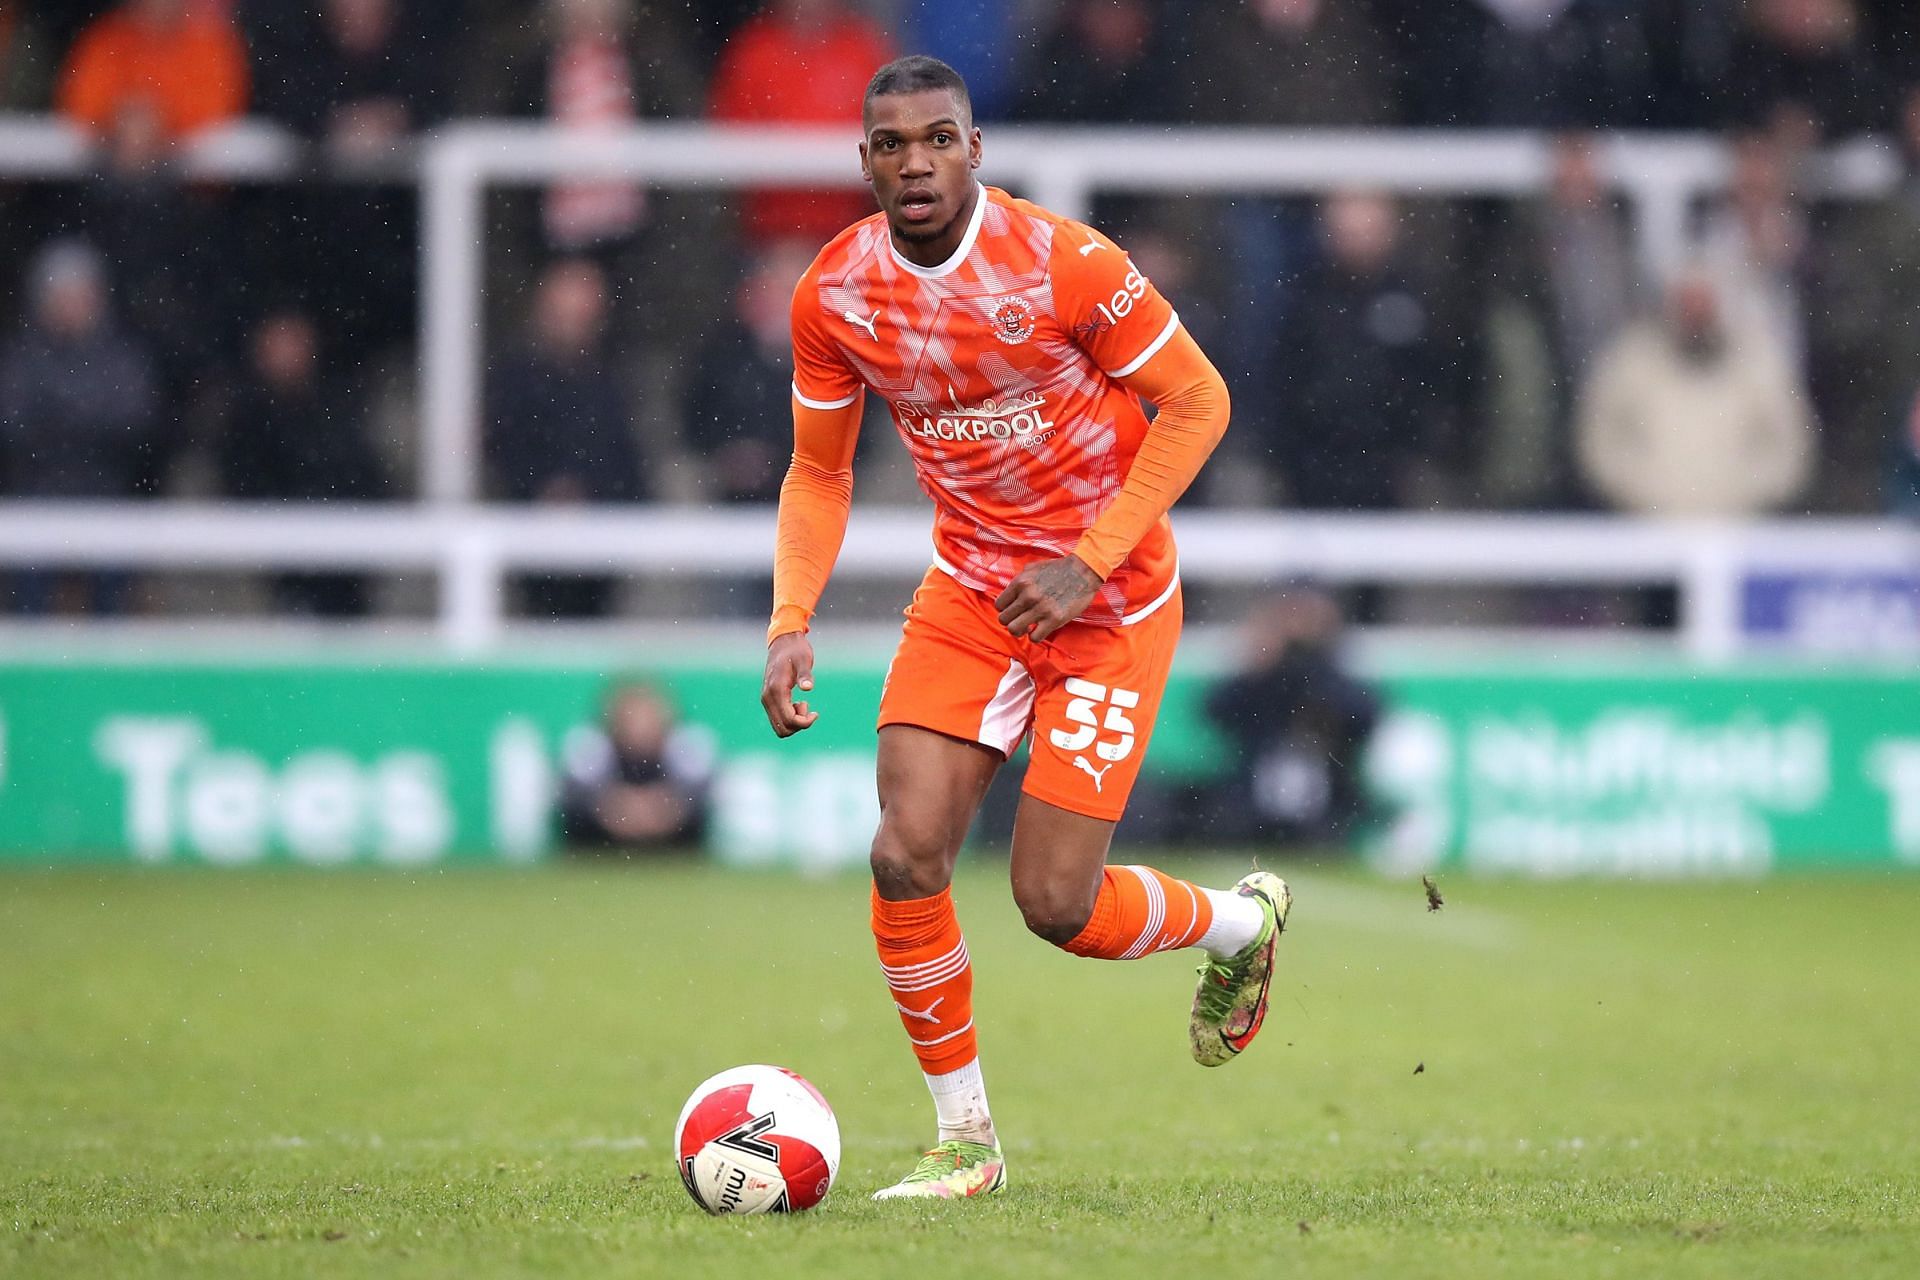 Sterling will be a huge miss for Blackpool